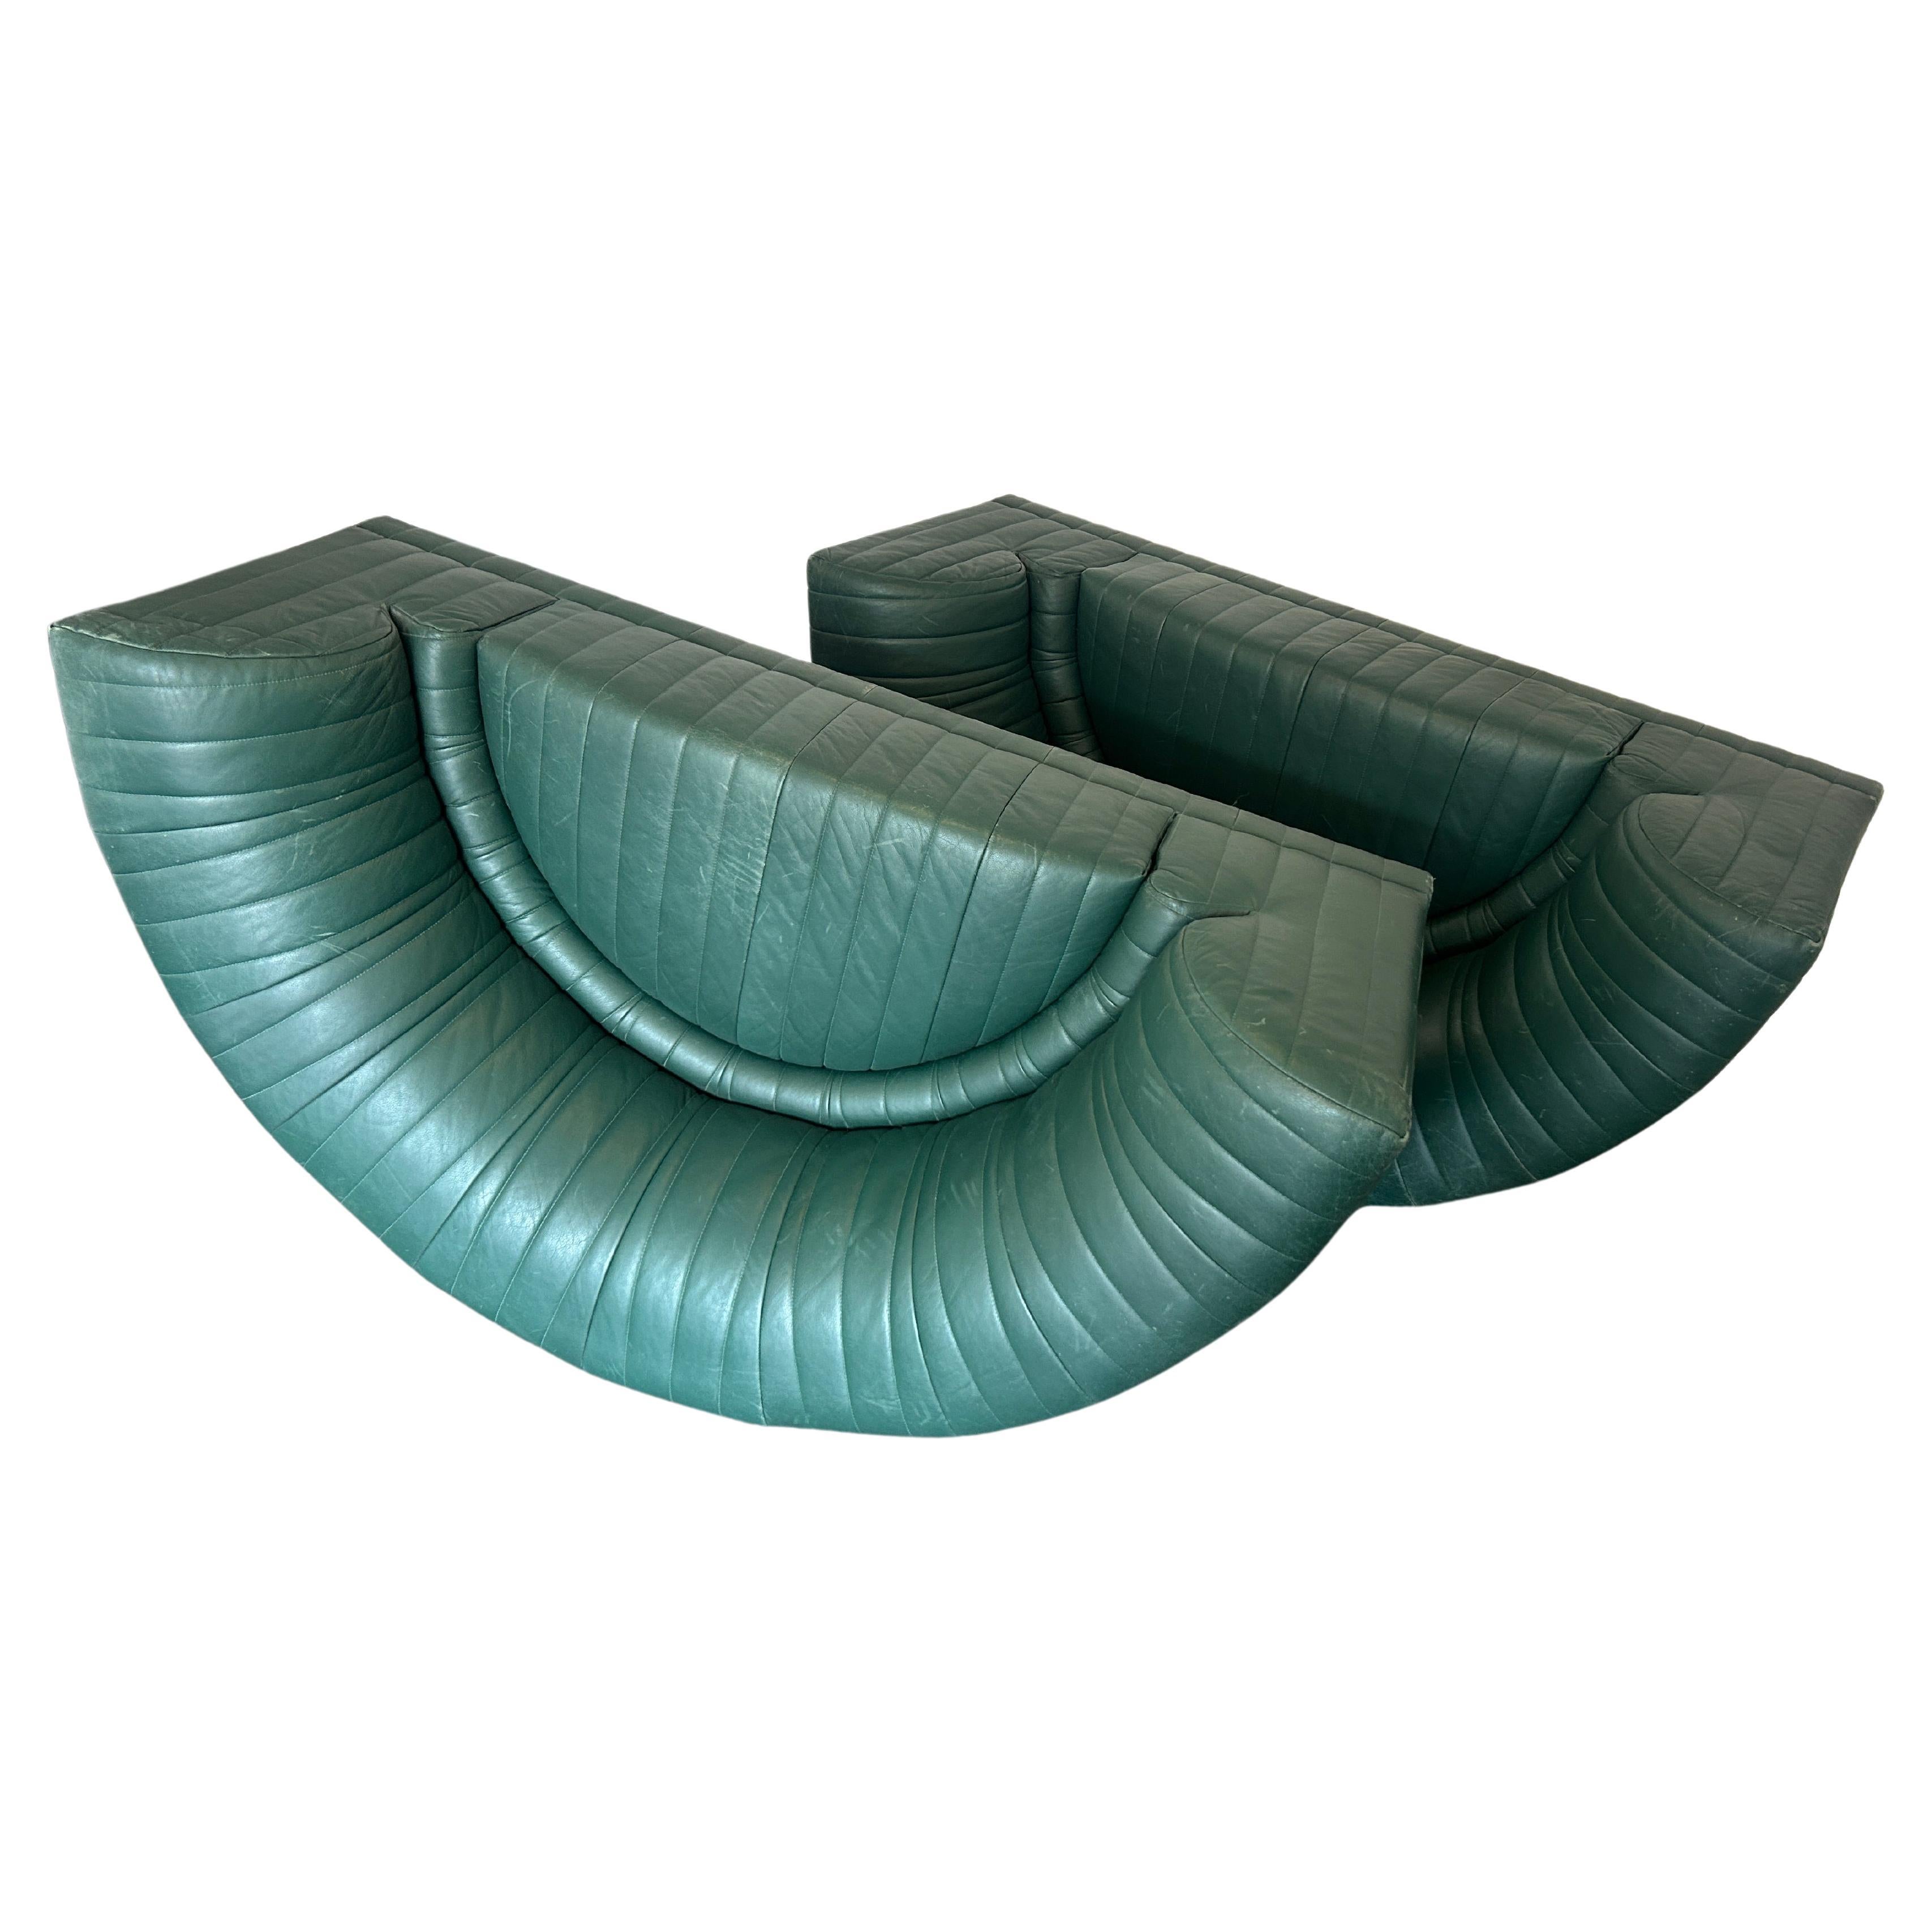 Woodwork Pair Post Modern Half Round Section of Roche Bobois Green Leather Sofas 1983 For Sale